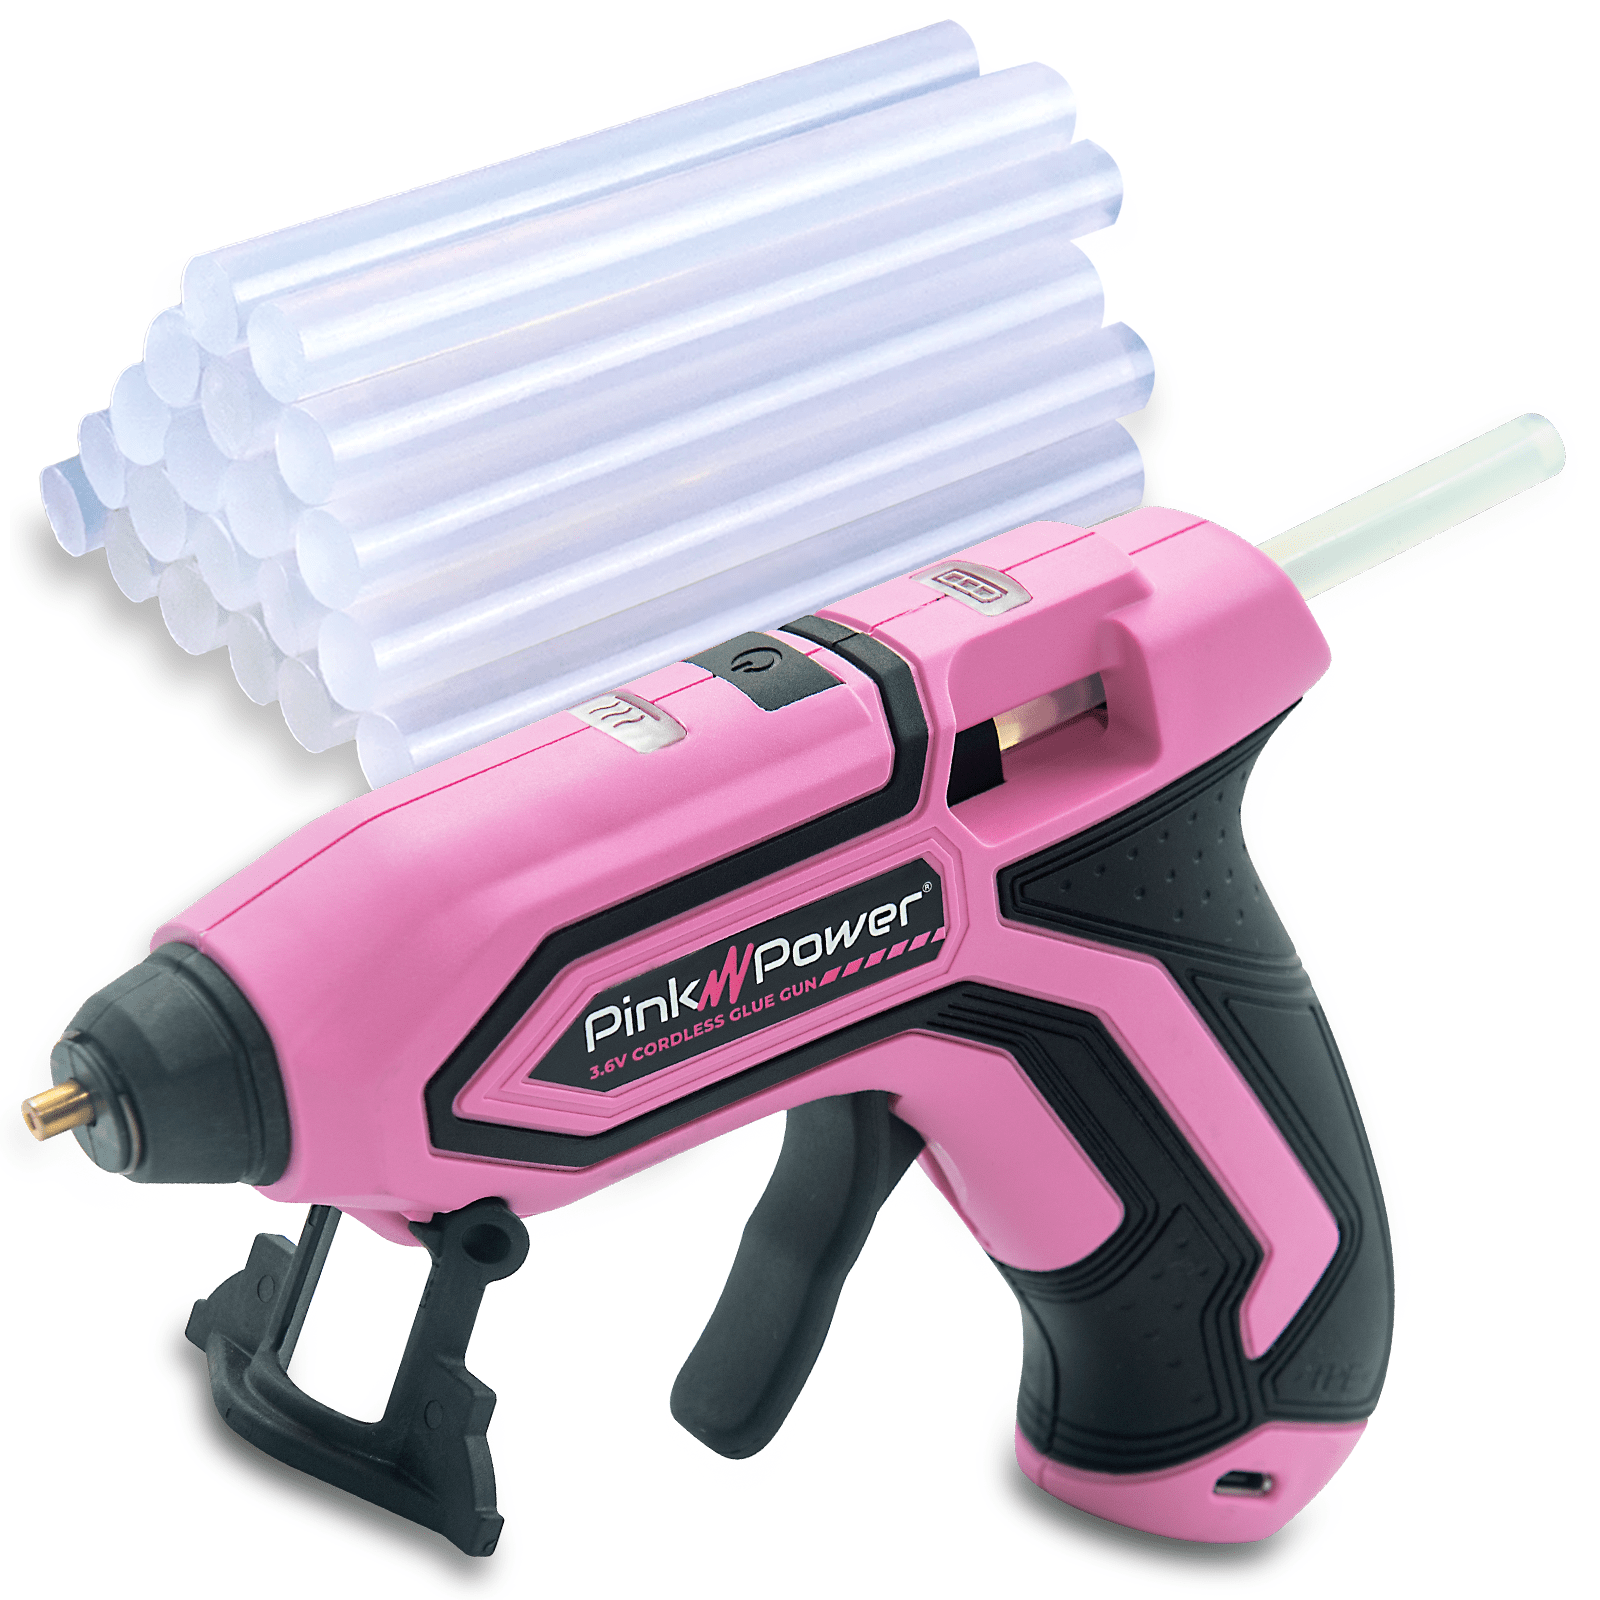 WORKPRO Cordless Hot Melt Glue Gun, Rechargeable Fast Preheating PINK - The  Family Flips